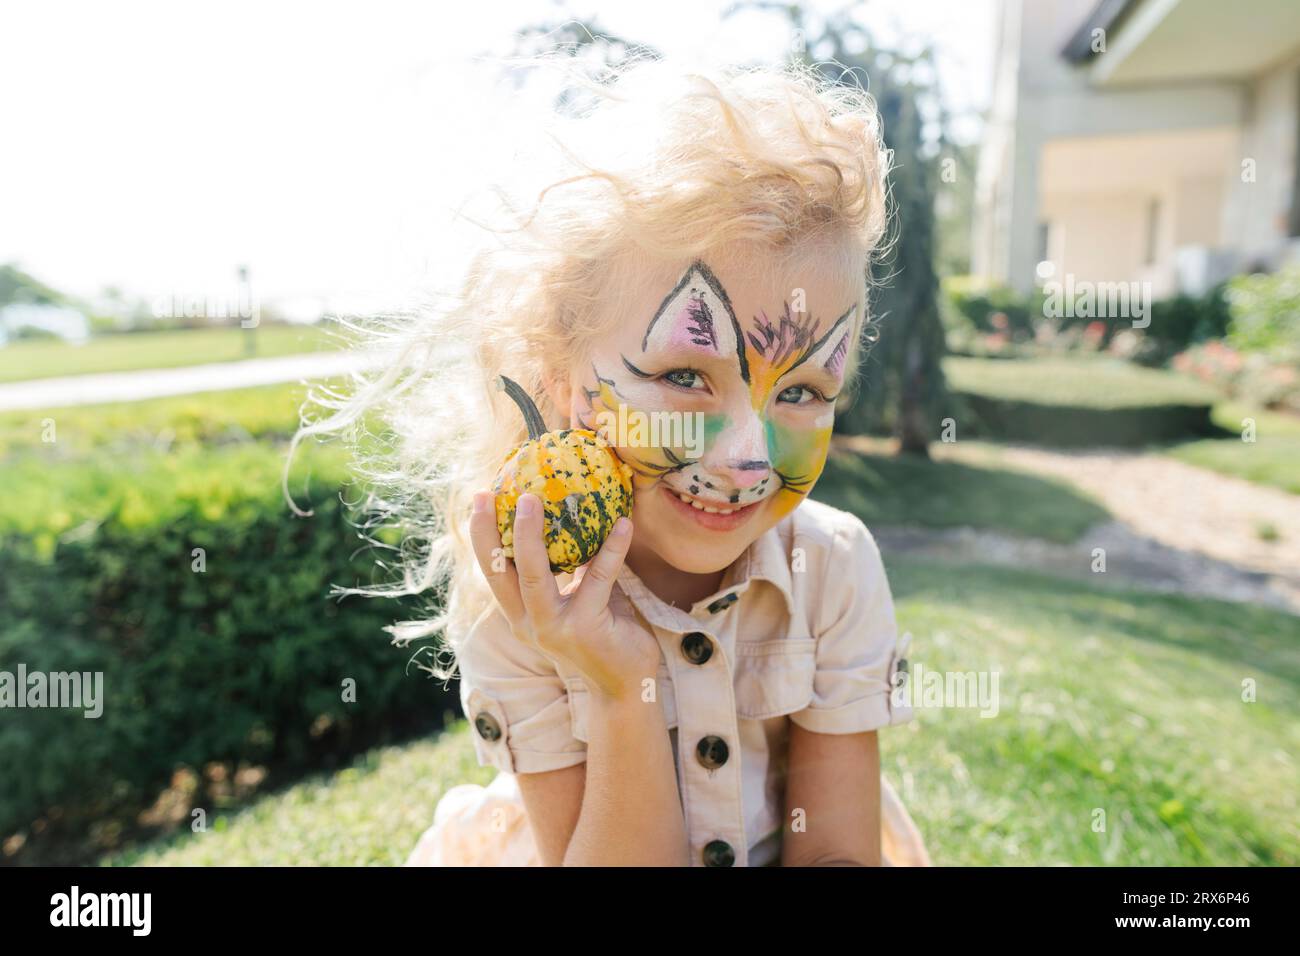 Happy girl with face painting holding small pumpkin on sunny day Stock Photo